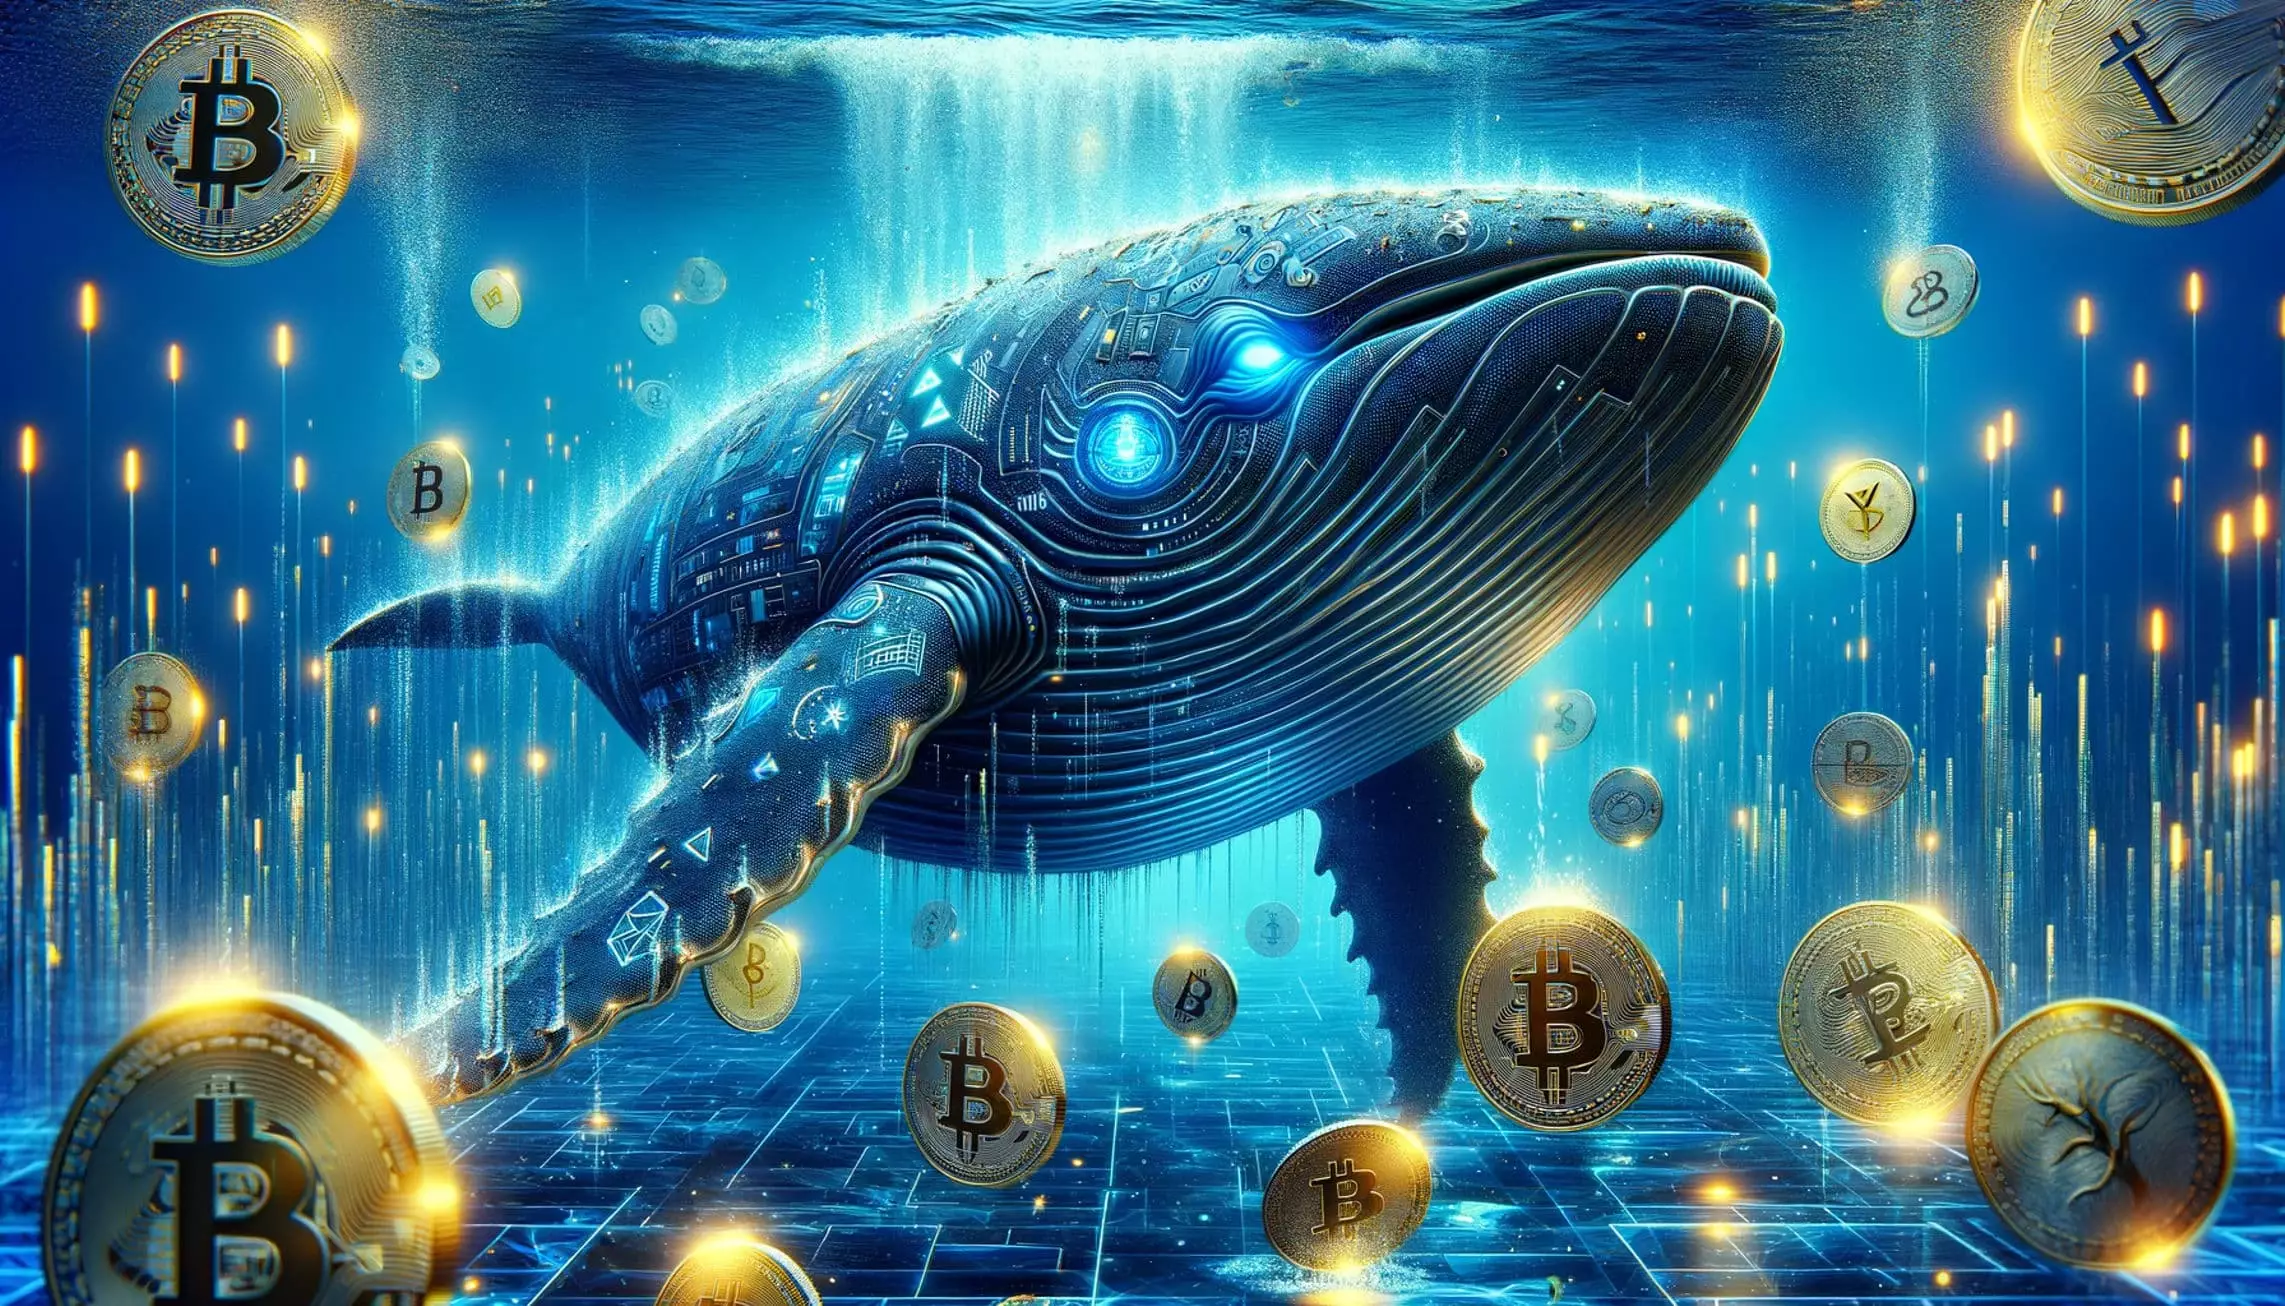 Whales Accumulating yPredict Tokens Ahead of Exchange Listings